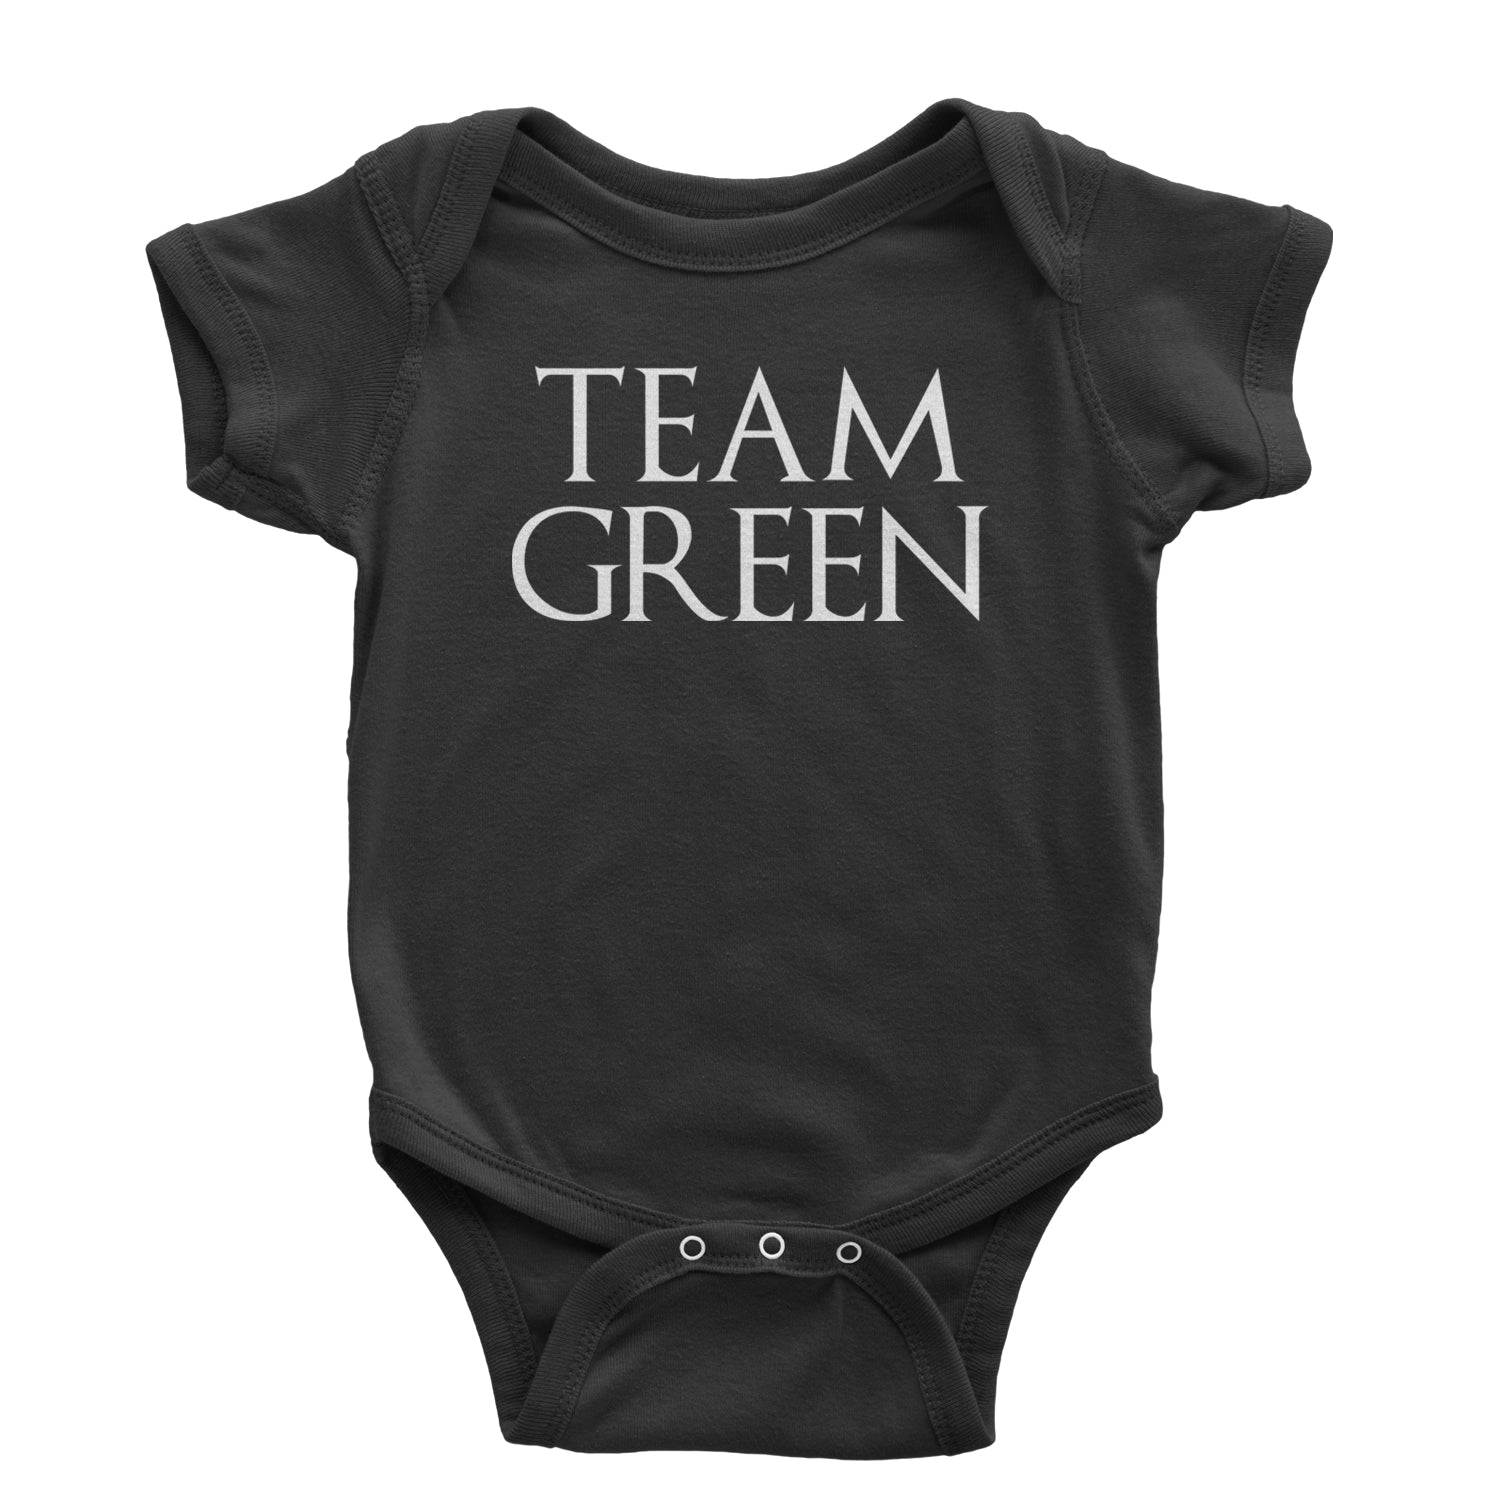 Team Green HotD Infant One-Piece Romper Bodysuit and Toddler T-shirt alicent, hightower, rhaneyra, targaryen by Expression Tees